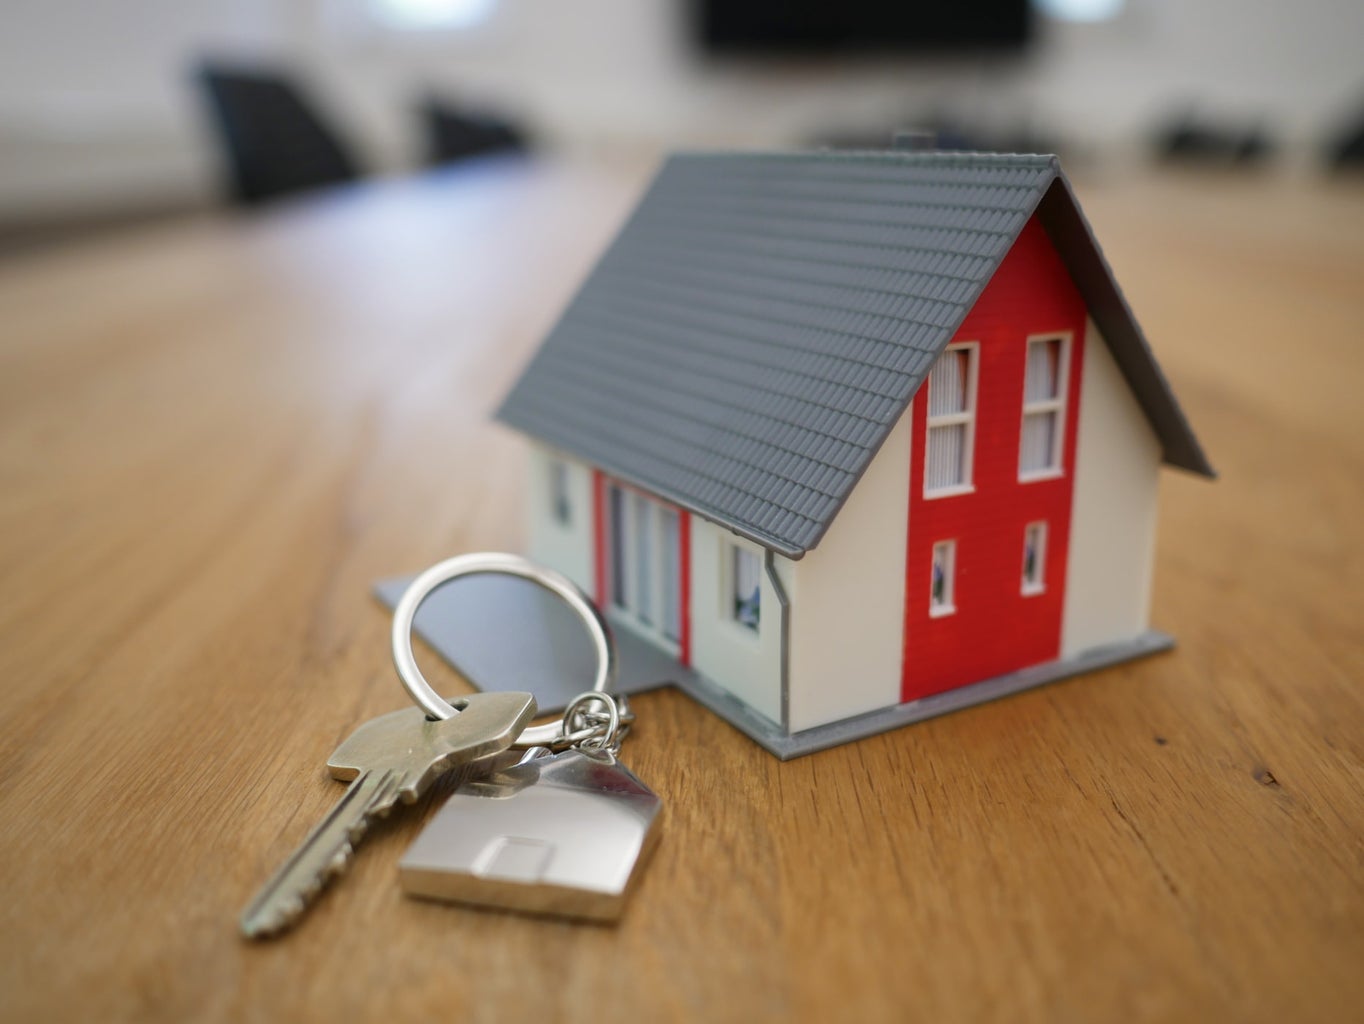 small house model and house key to represent real estate career